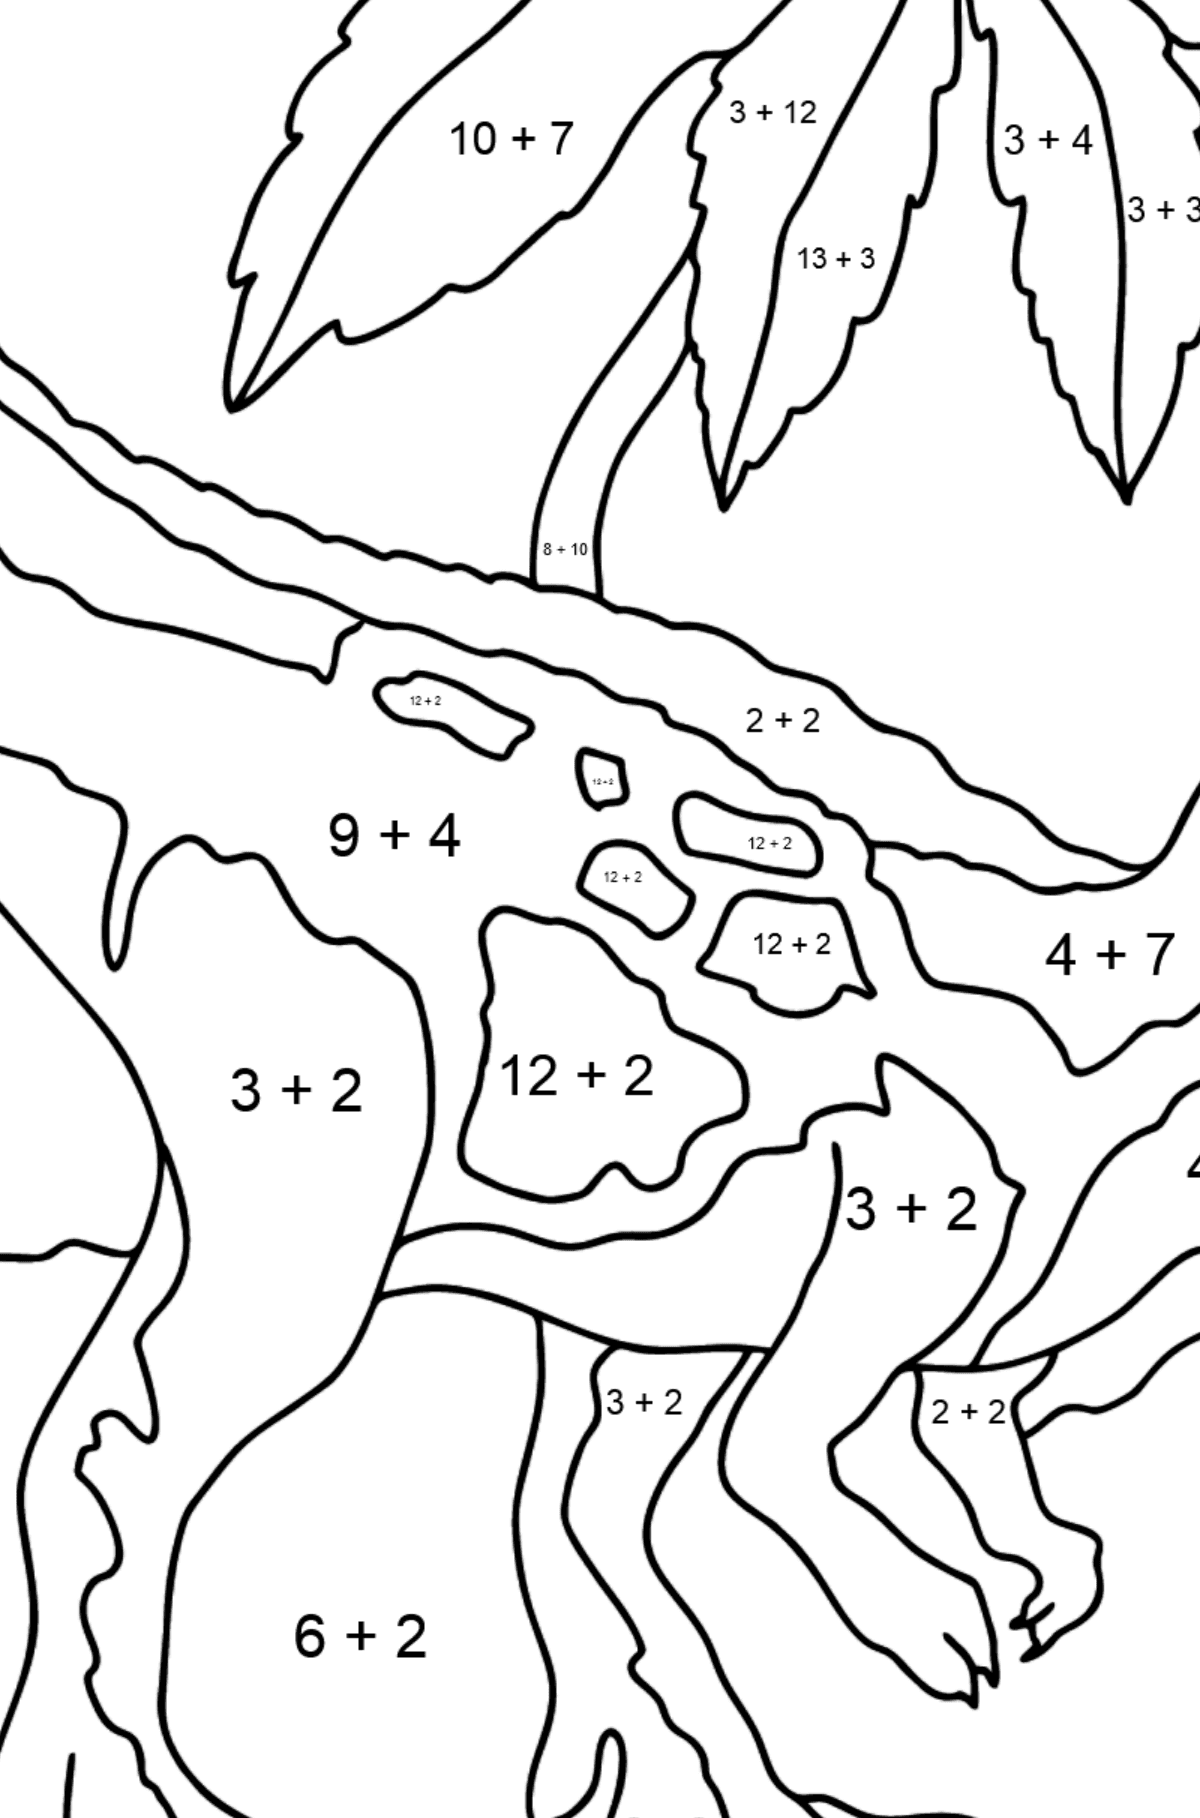 Coloring Page - Tyrannosaurus - The King of Dinosaurs - Math Coloring - Addition for Kids